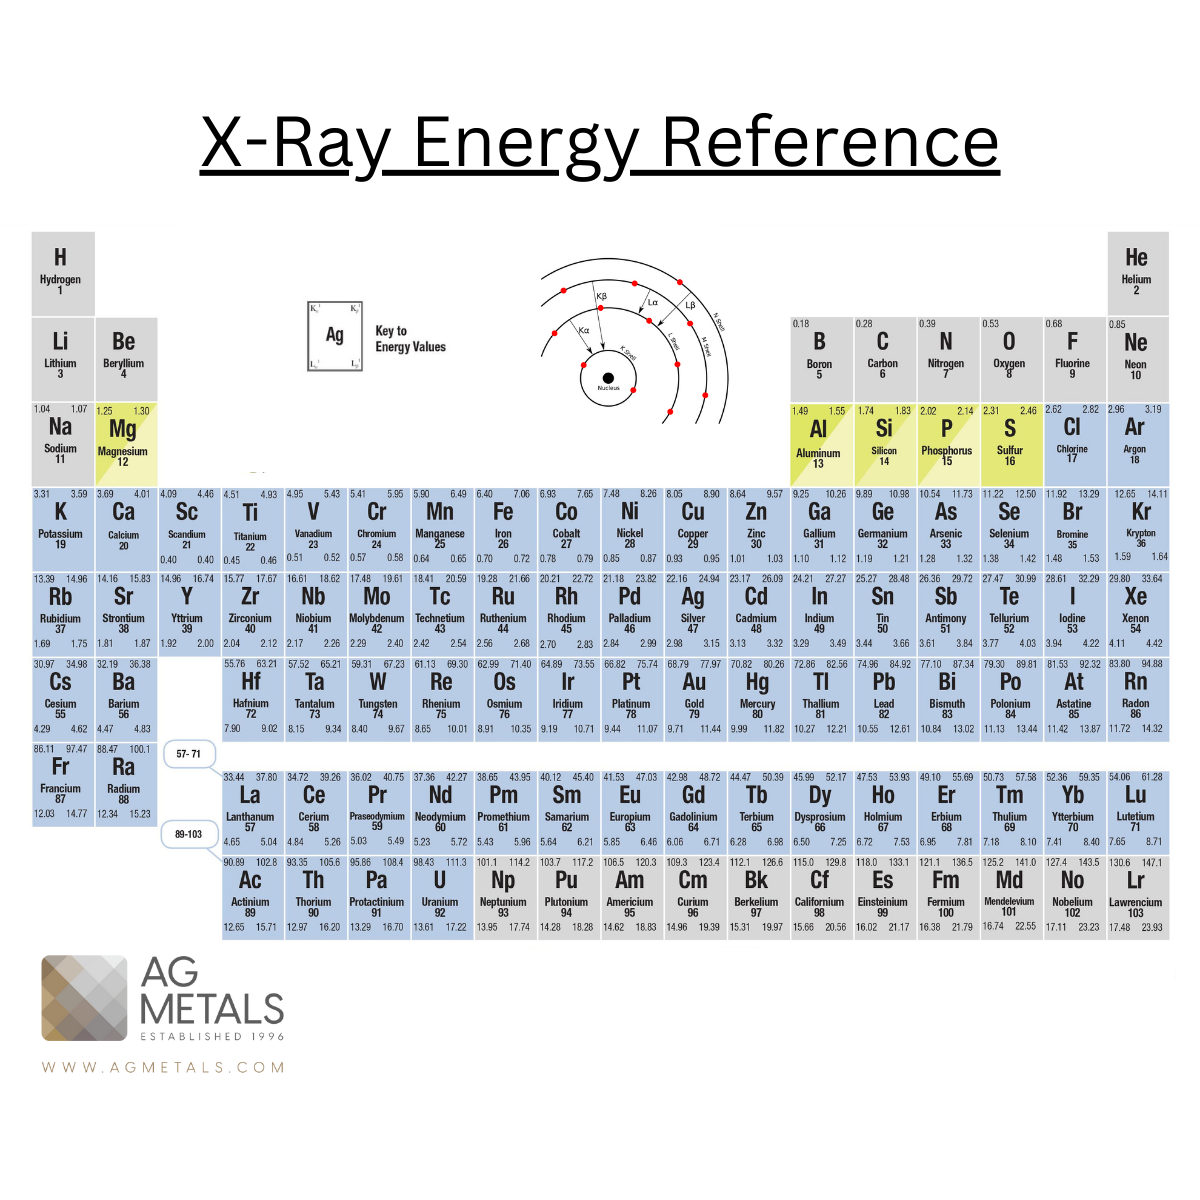 x-ray energy reference table